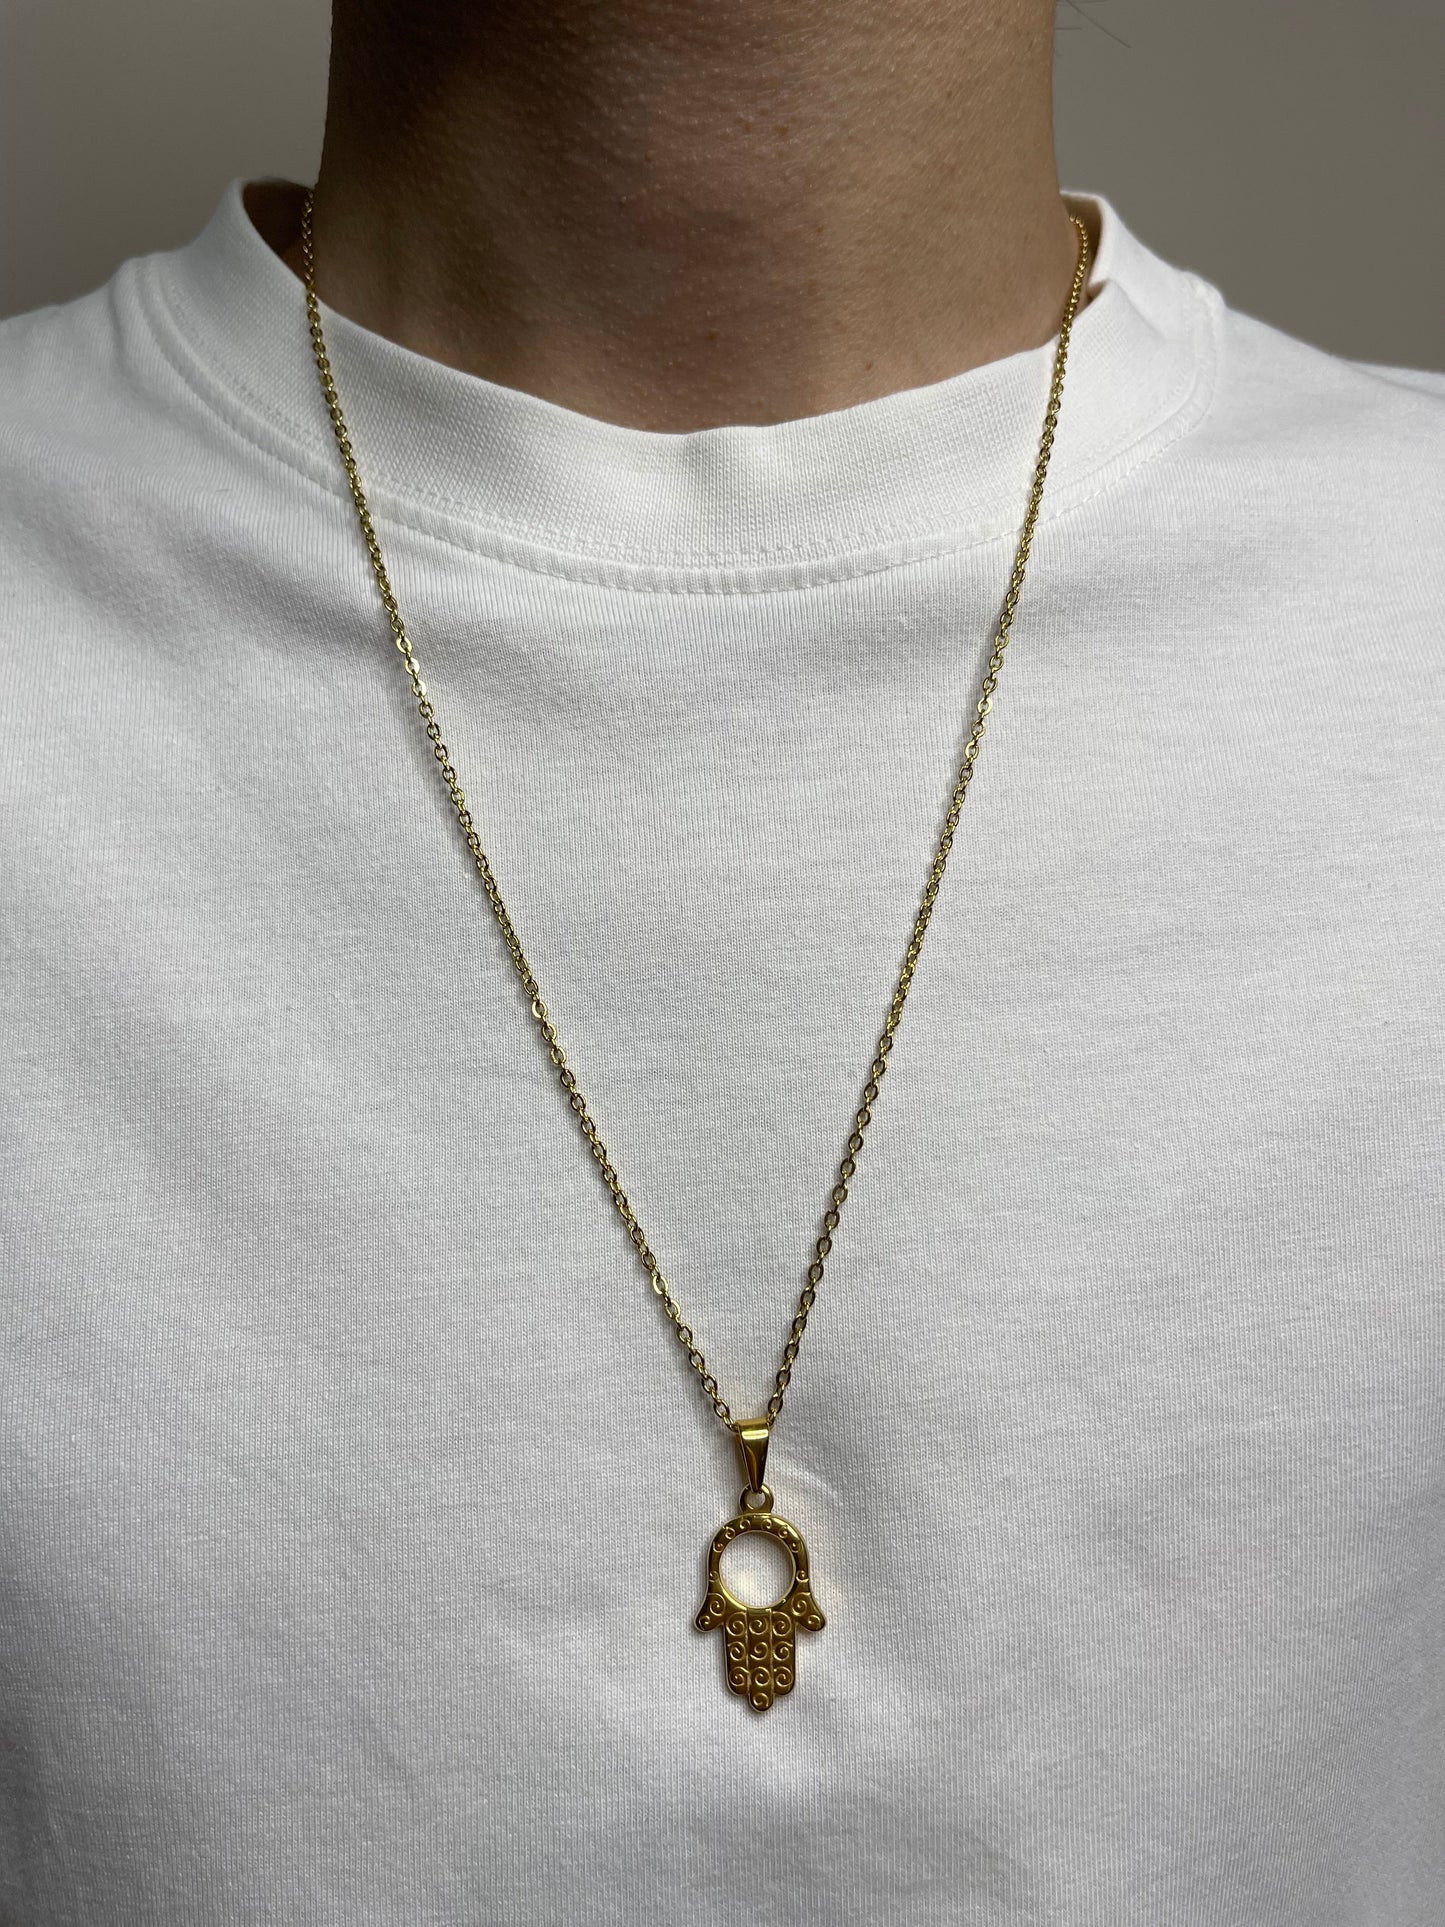 "THE HAND OF GOD" PENDANT NECKLACE | GOLD